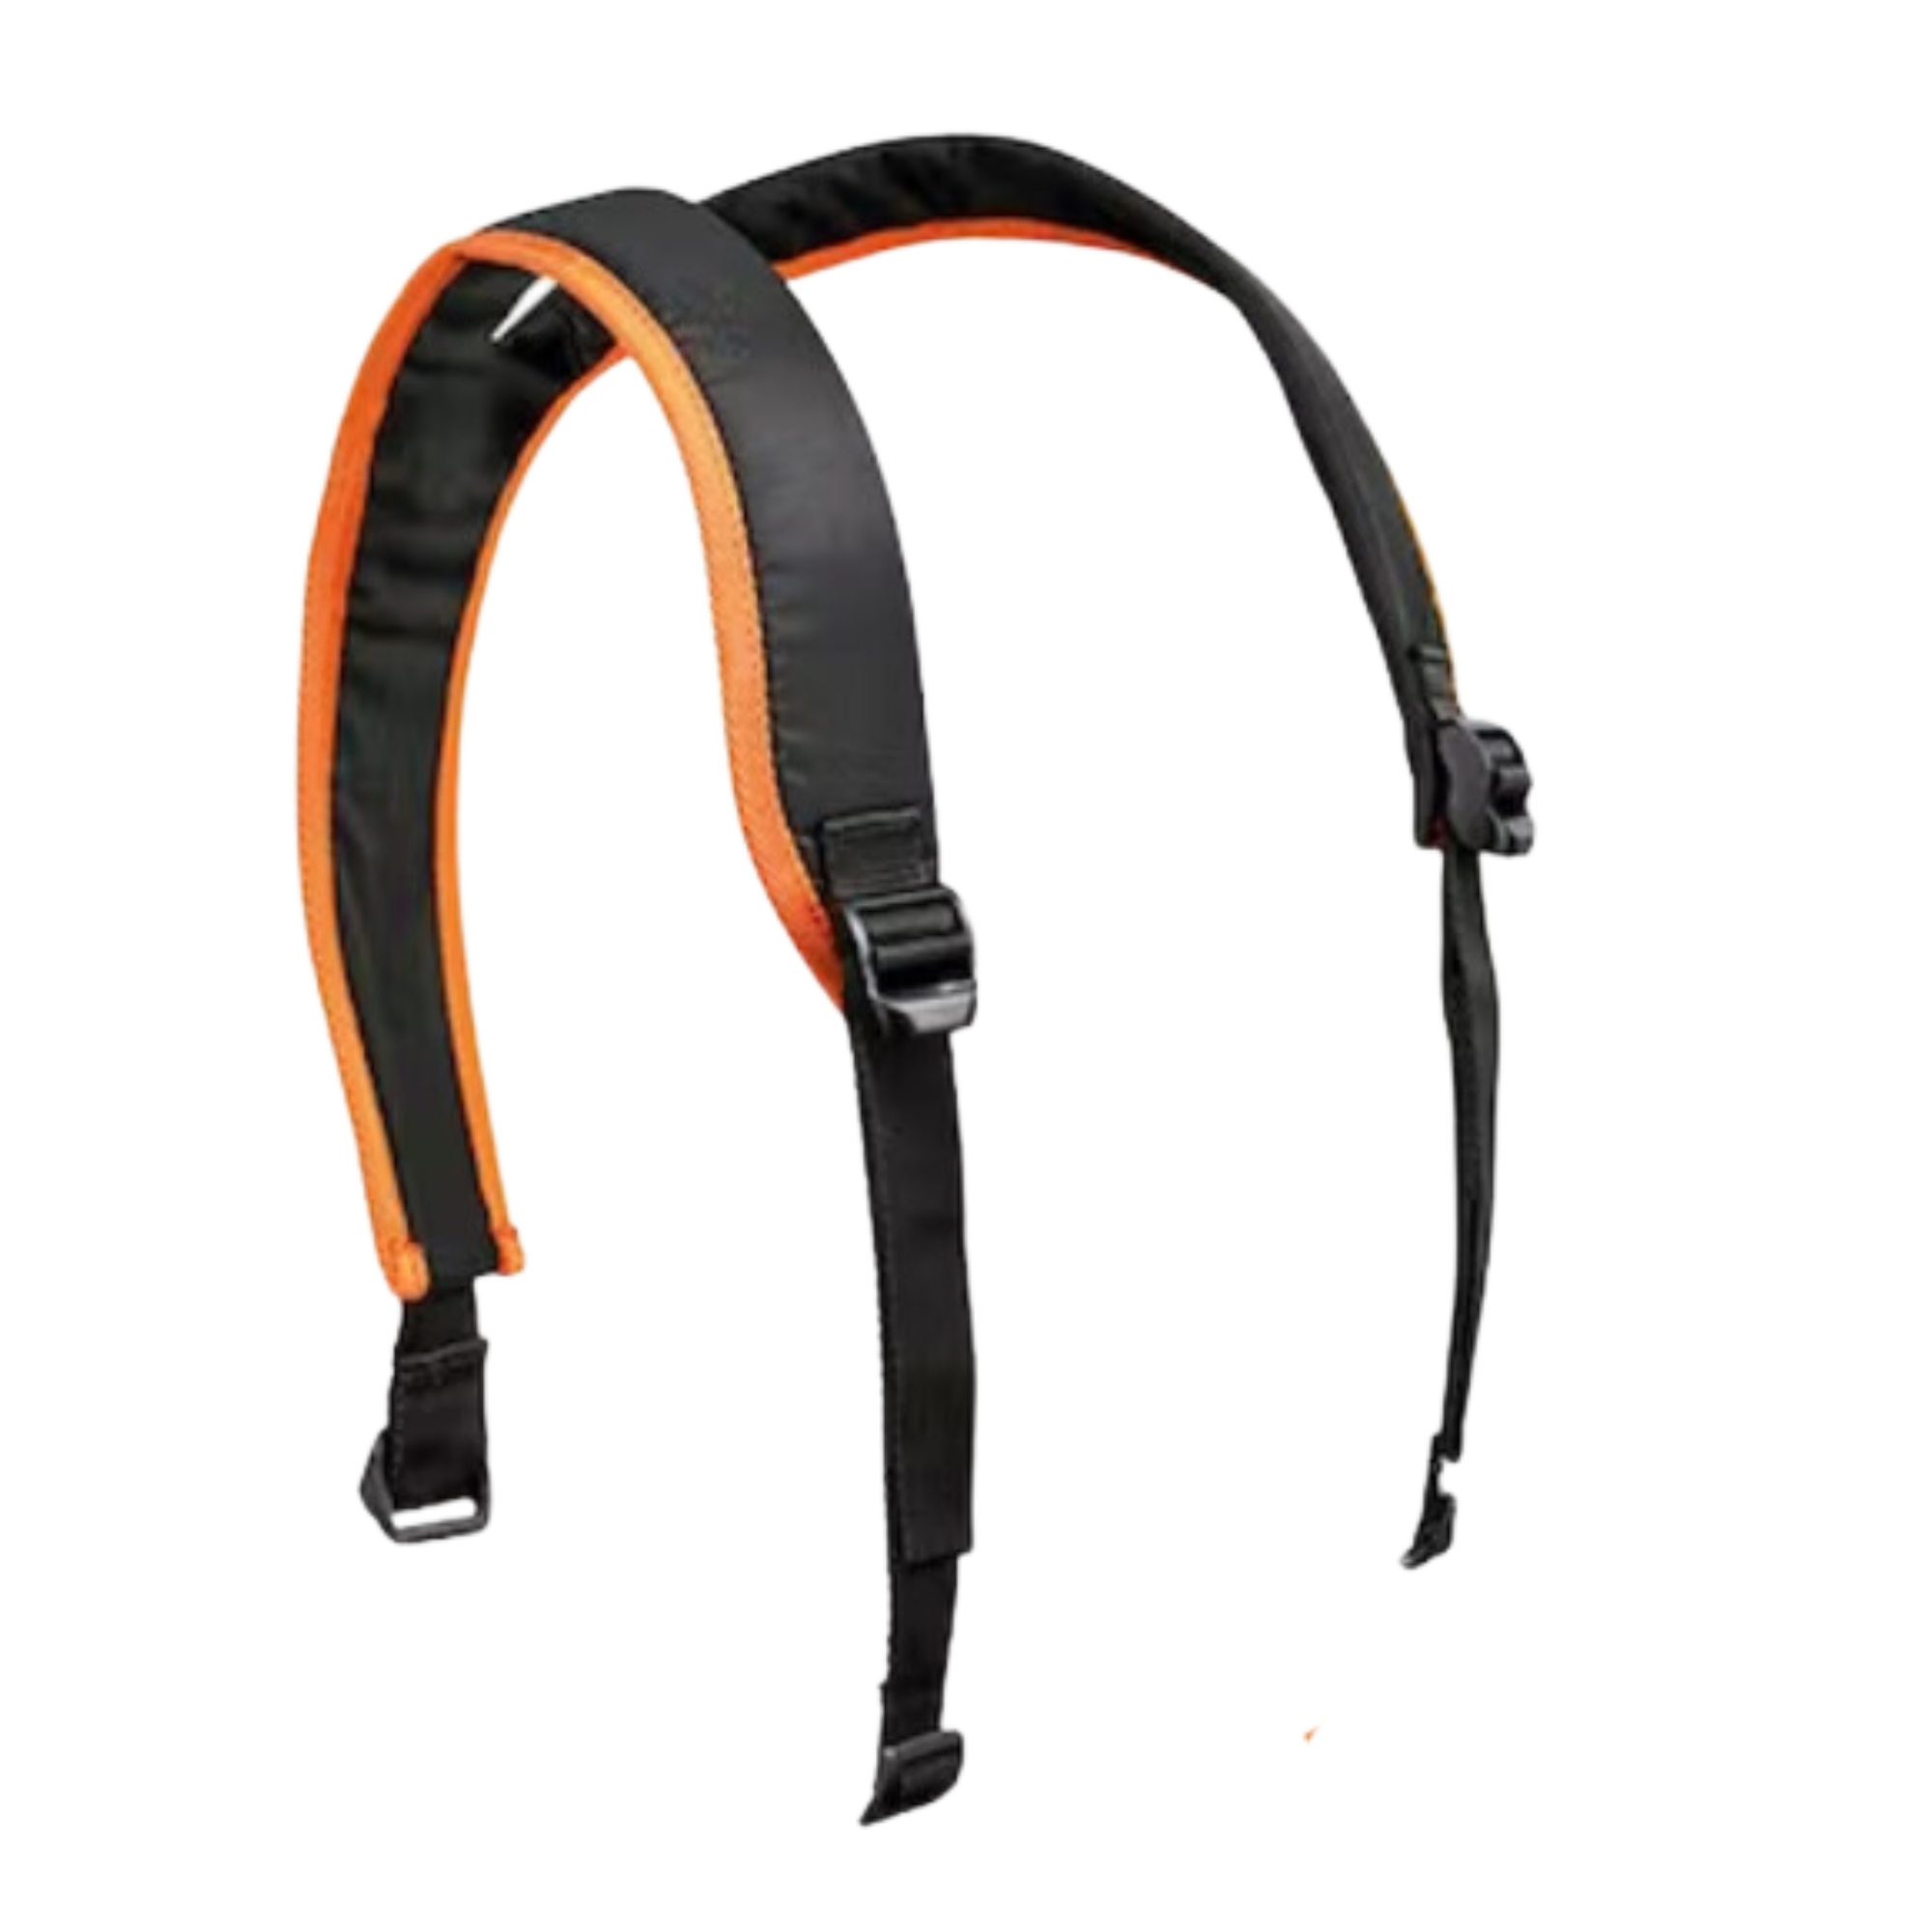 Stihl Battery Belt with Double Shoulder Harness | 4850 490 0500